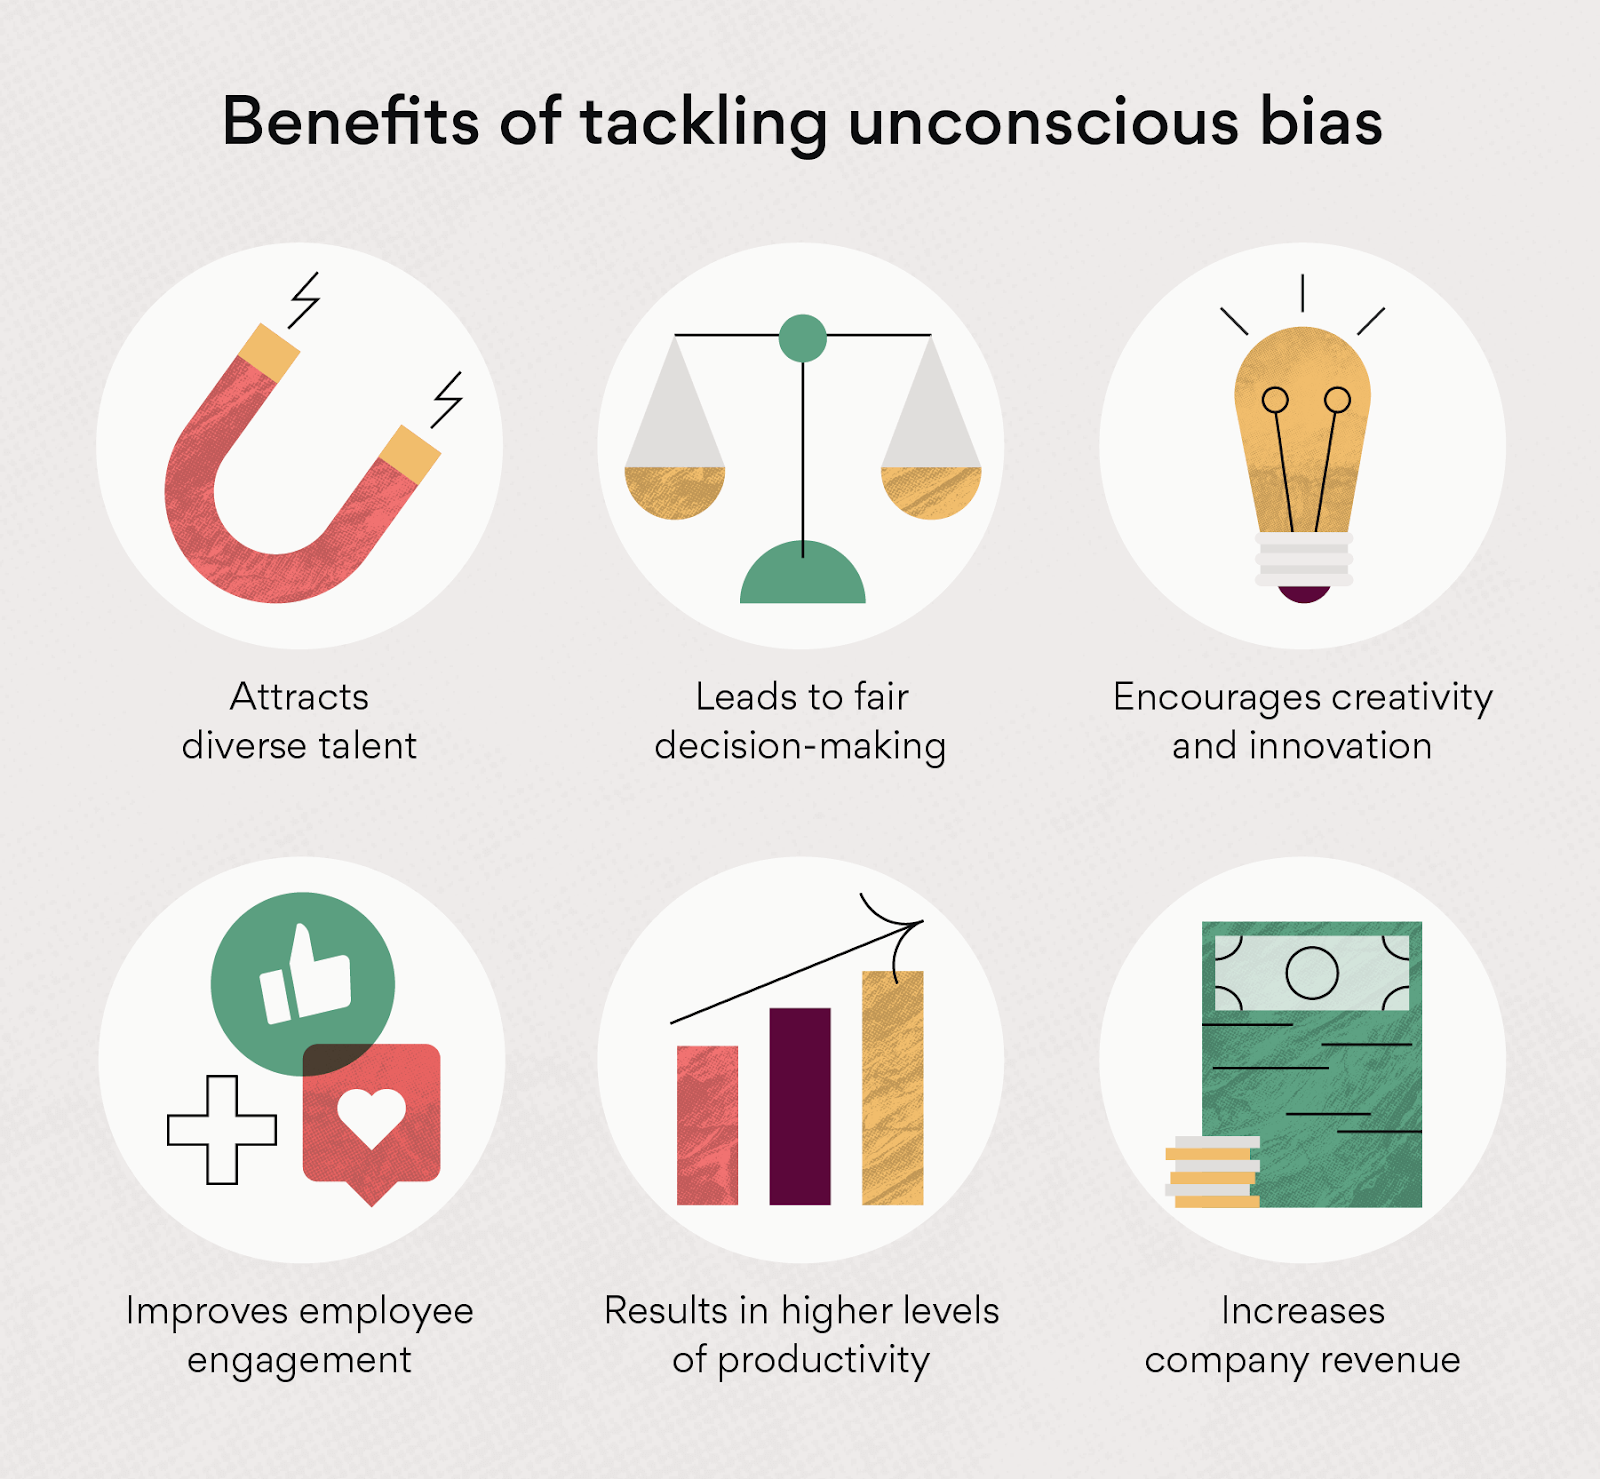 Benefits of tackling unconscious bias. (A chart with 6 decorative graphic icons). Attracts diverse talent. Leads to fair decision-making. Encourages creativity and innovation. Improves employee engagement. Results in higher levels of productivity. Increases company revenue.